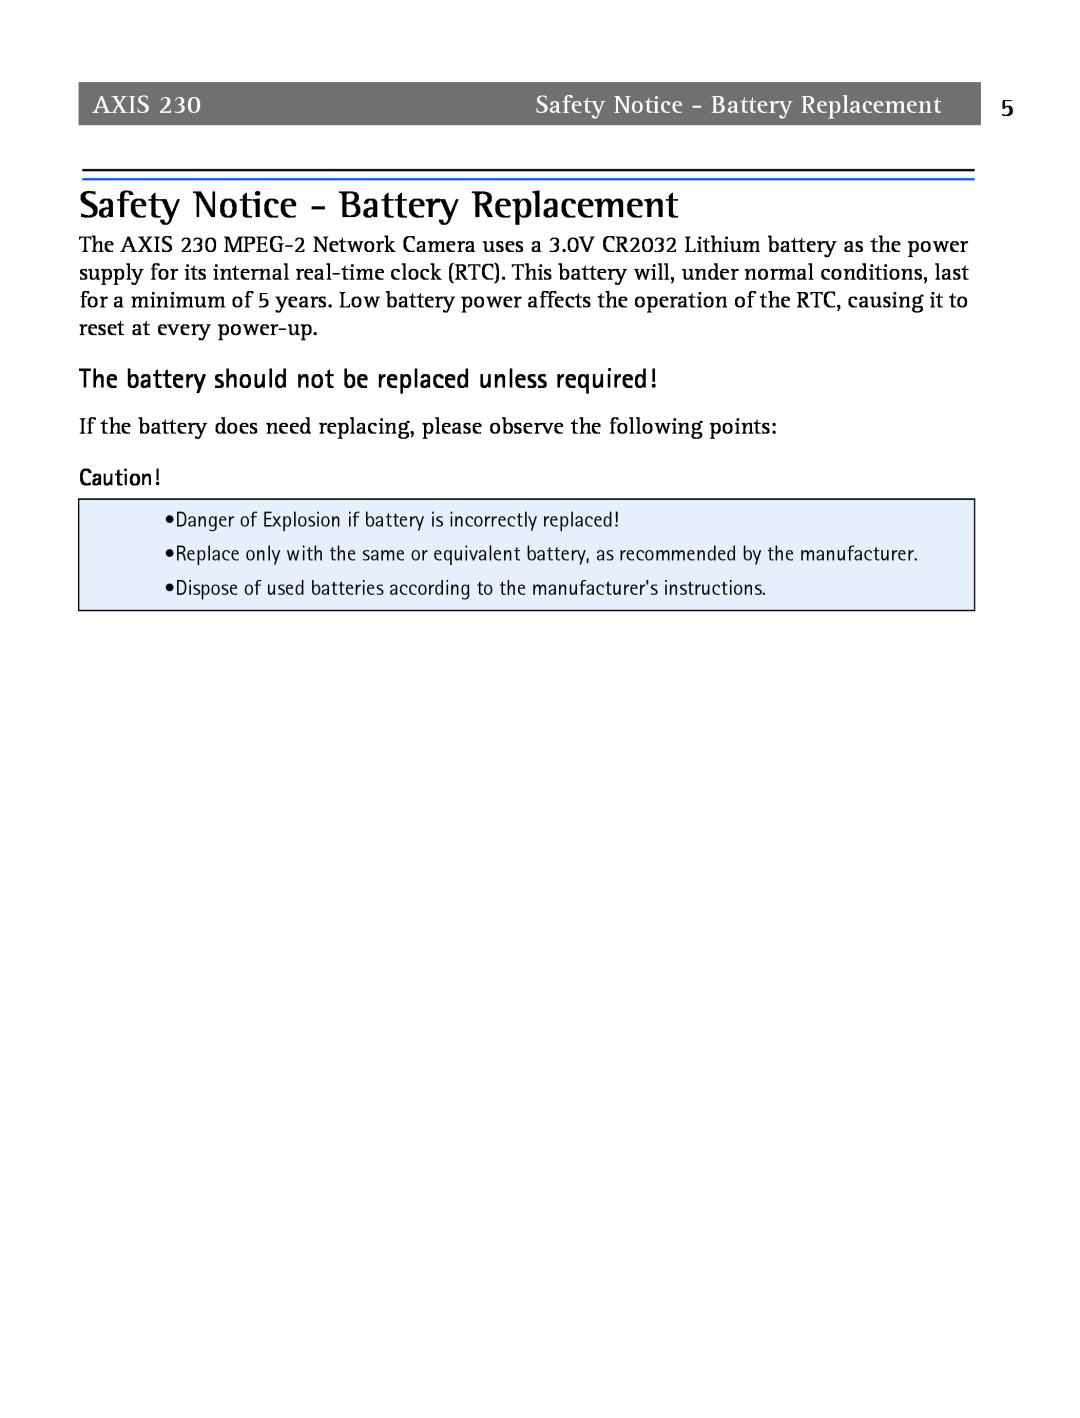 Axis Communications 2 user manual Safety Notice - Battery Replacement, Axis 